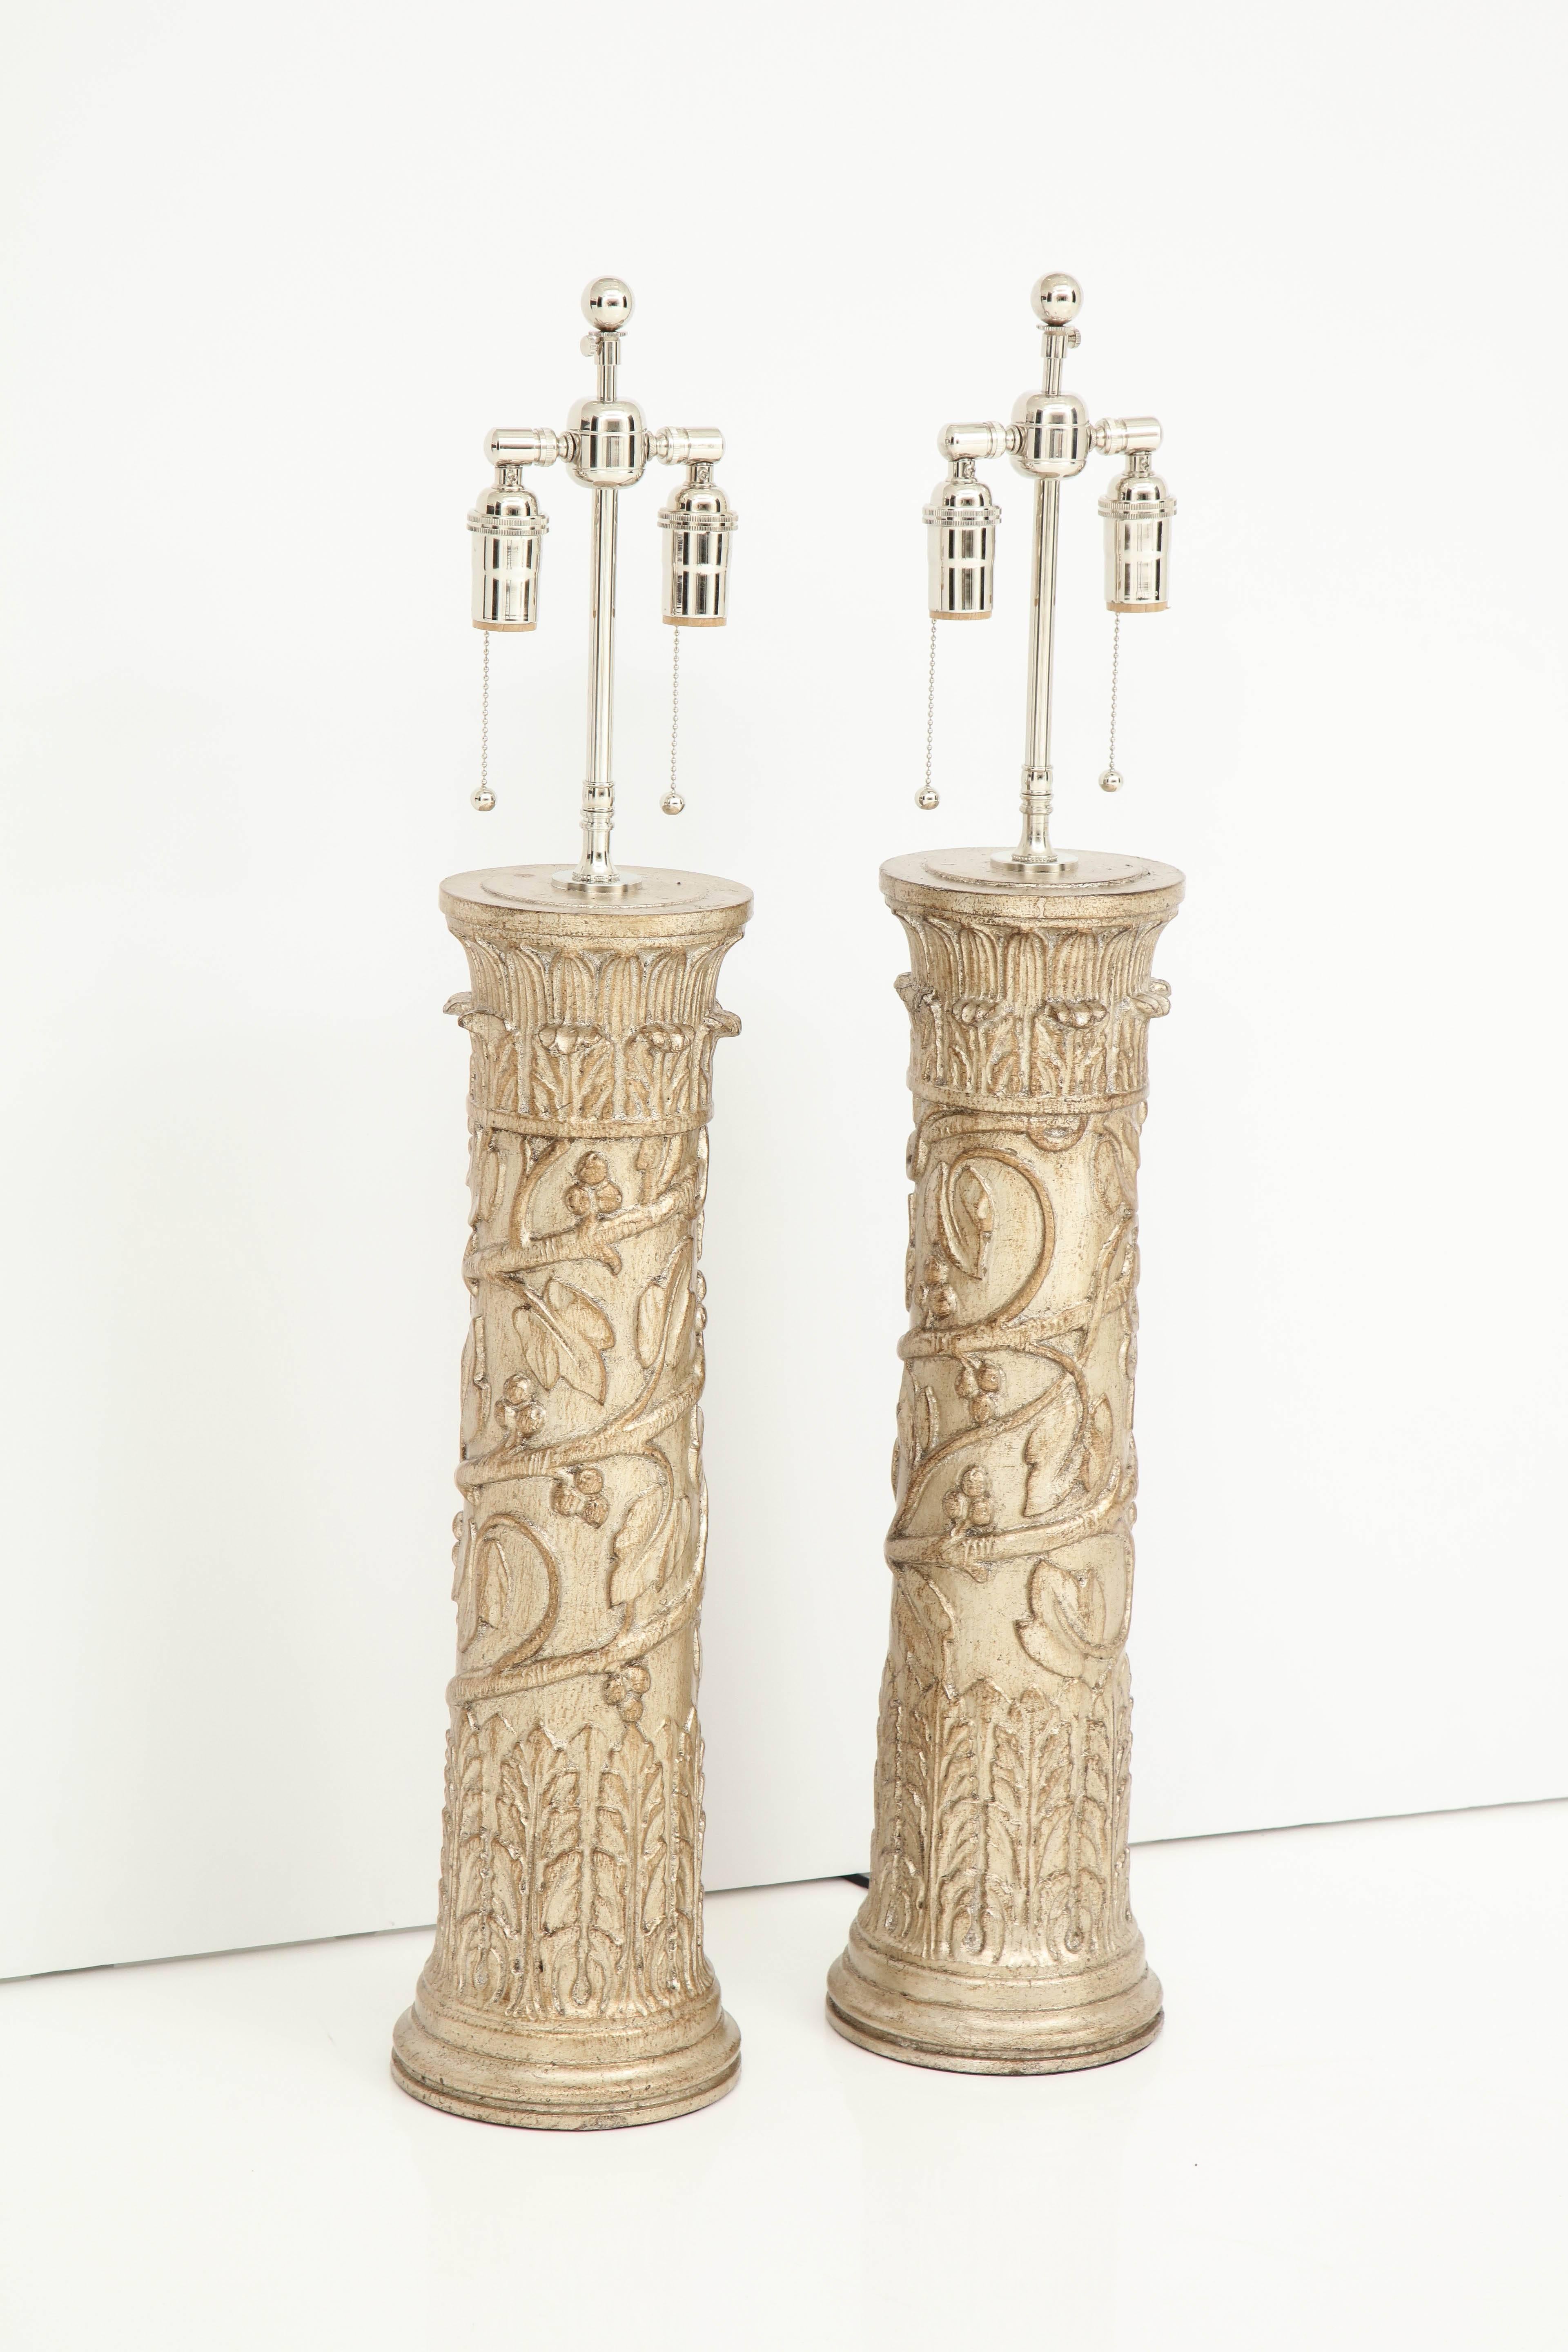 Pair of column lamps by James Mont.
The lamps have a beautiful decorative design with a glazed silver leaf finish.
They have been newly rewired for the US with polished nickel double clusters that take standard light bulbs.